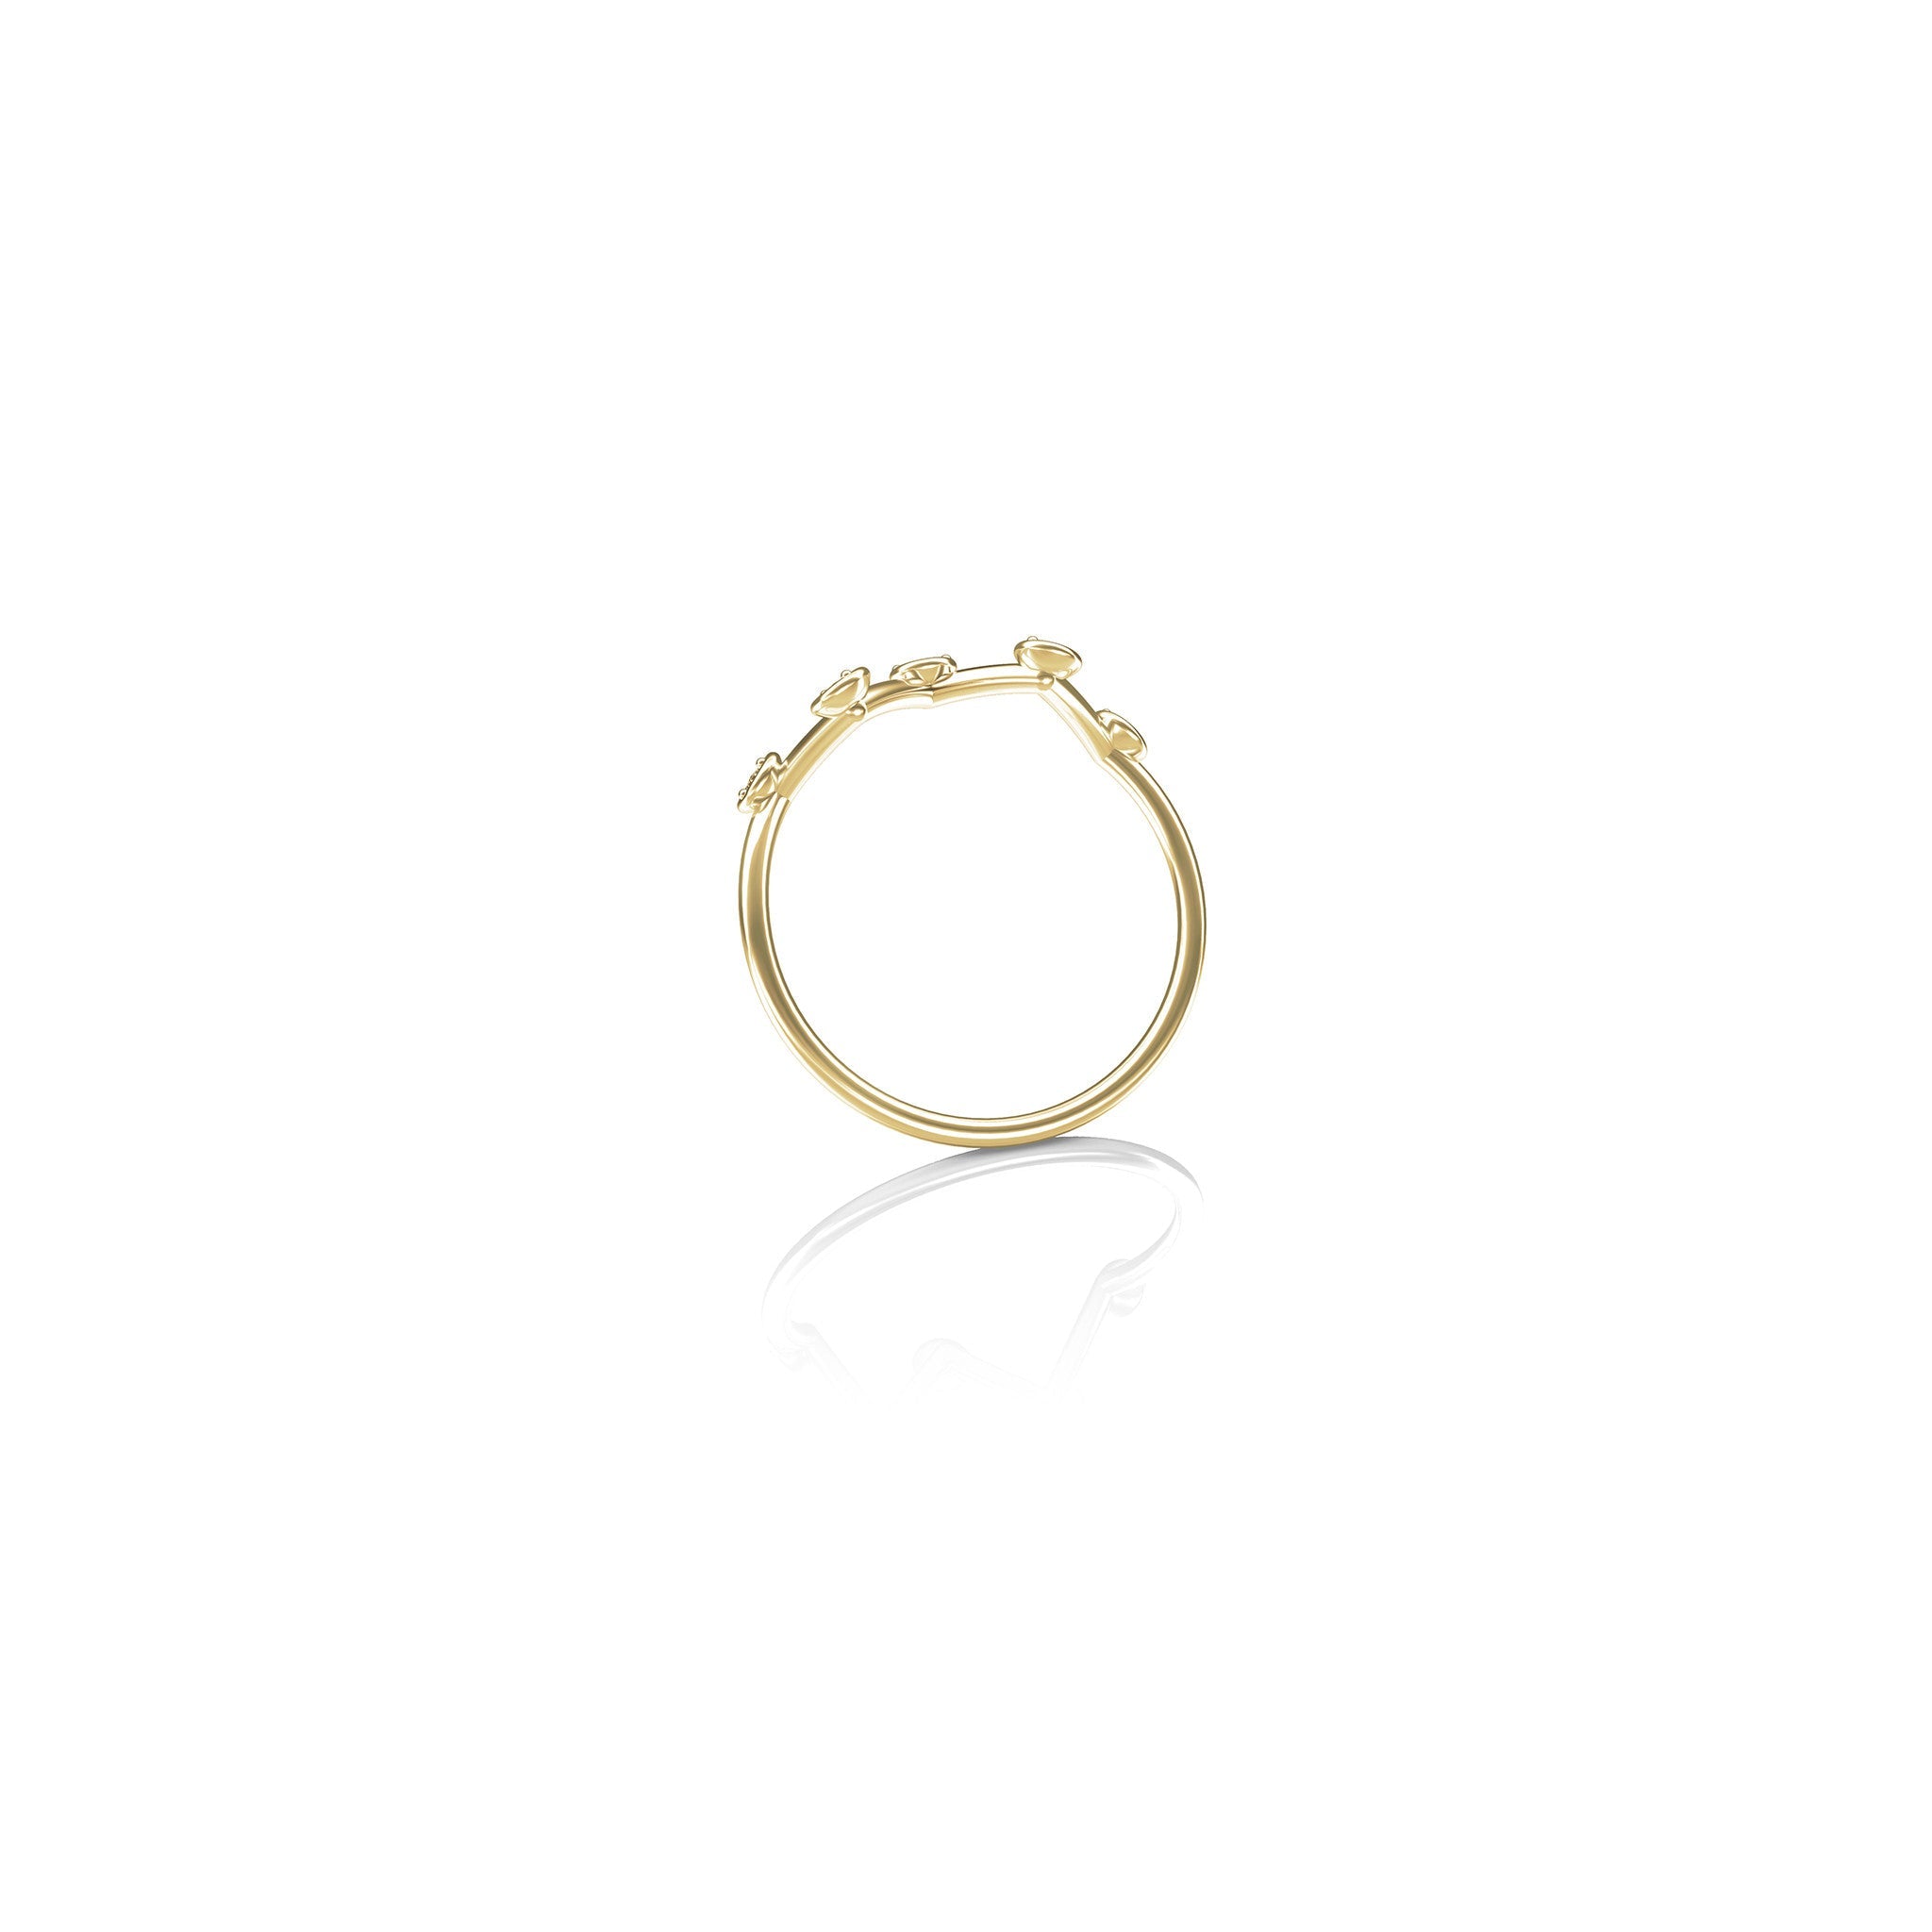 IN STOCK 18ct Yellow Gold Cassiopeia Constellation Midi Ring